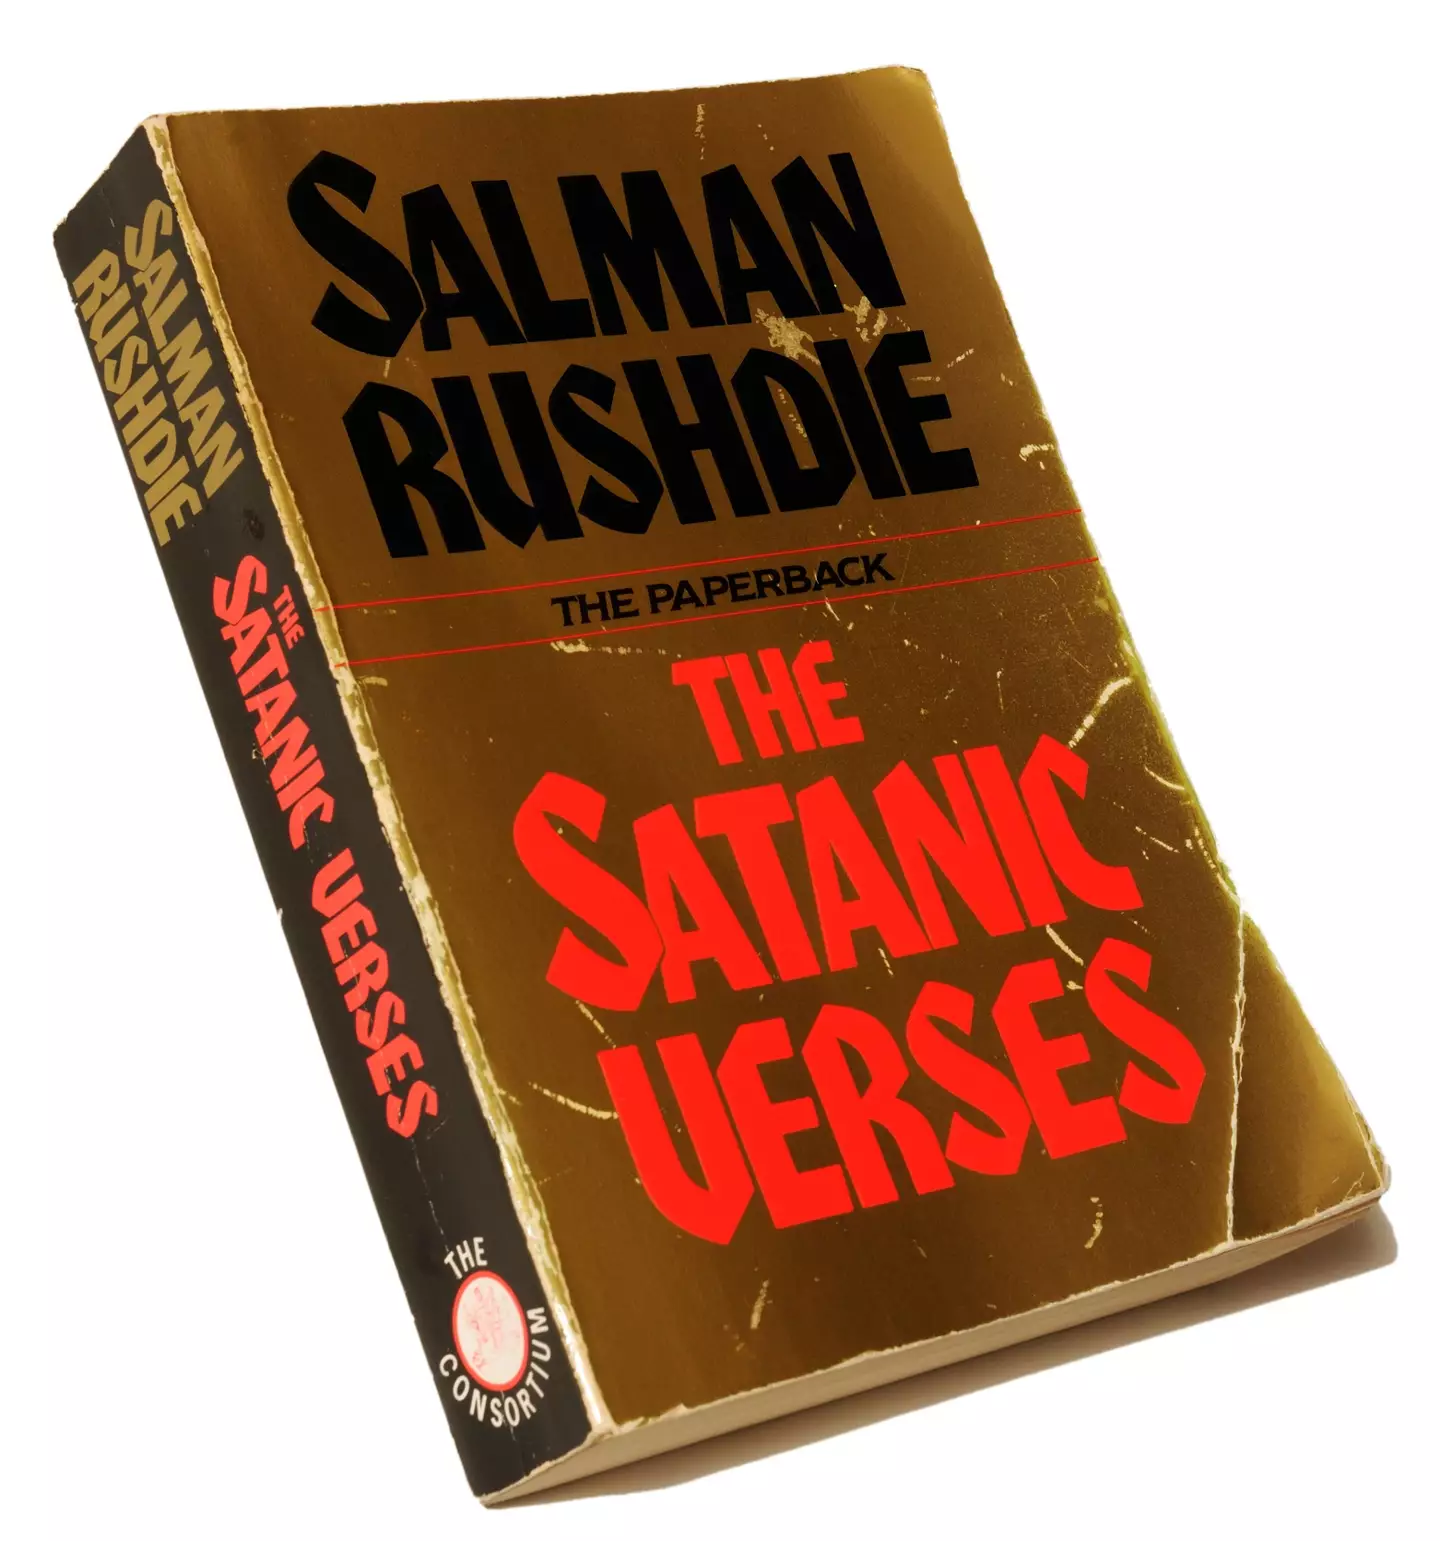 Rushdie's most famous book 'The Satanic Verses' saw a bounty placed on his head.